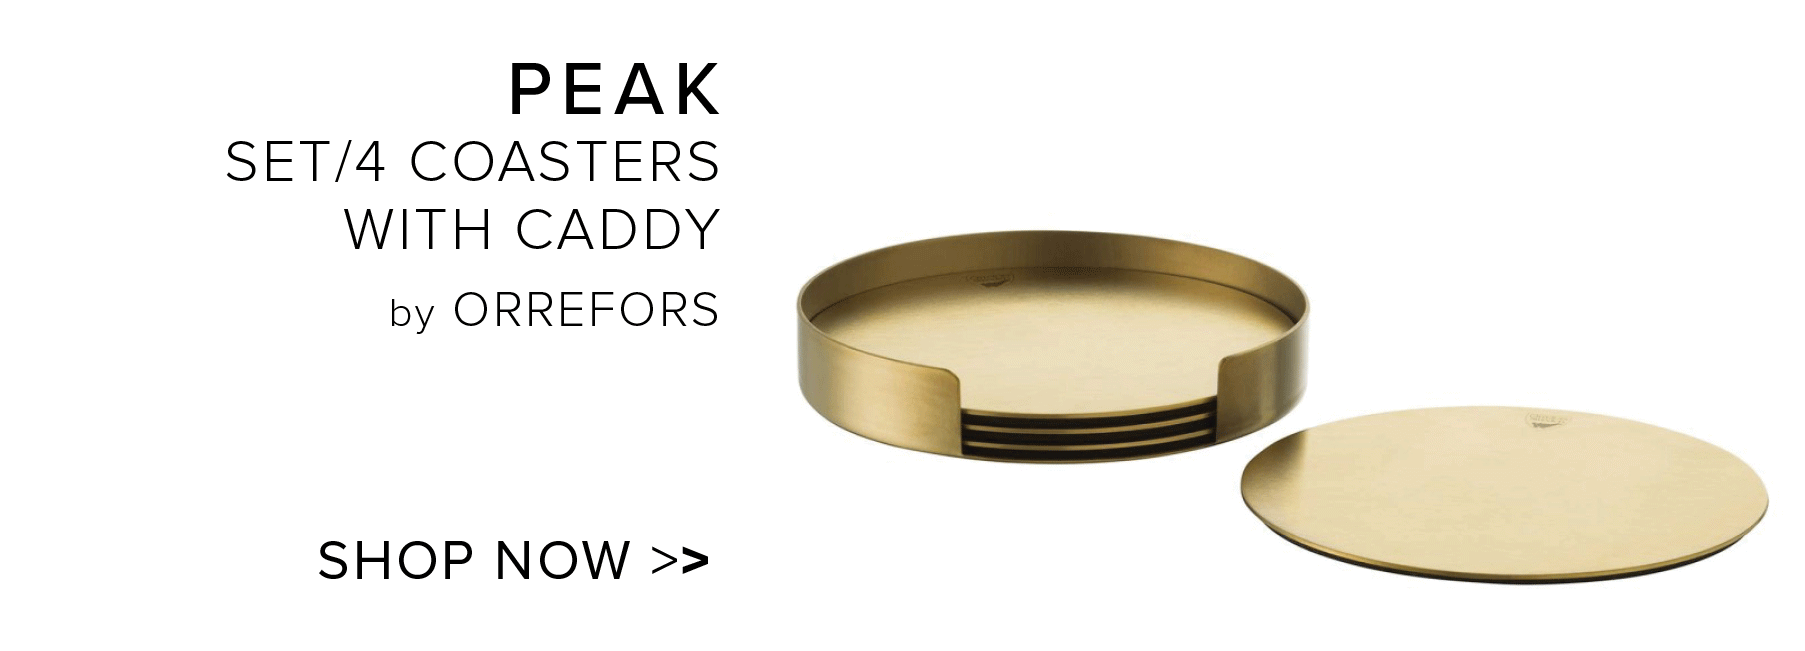 PEAK SET4 COASTERS WITH CADDY by ORREFORS SHOP NOW 